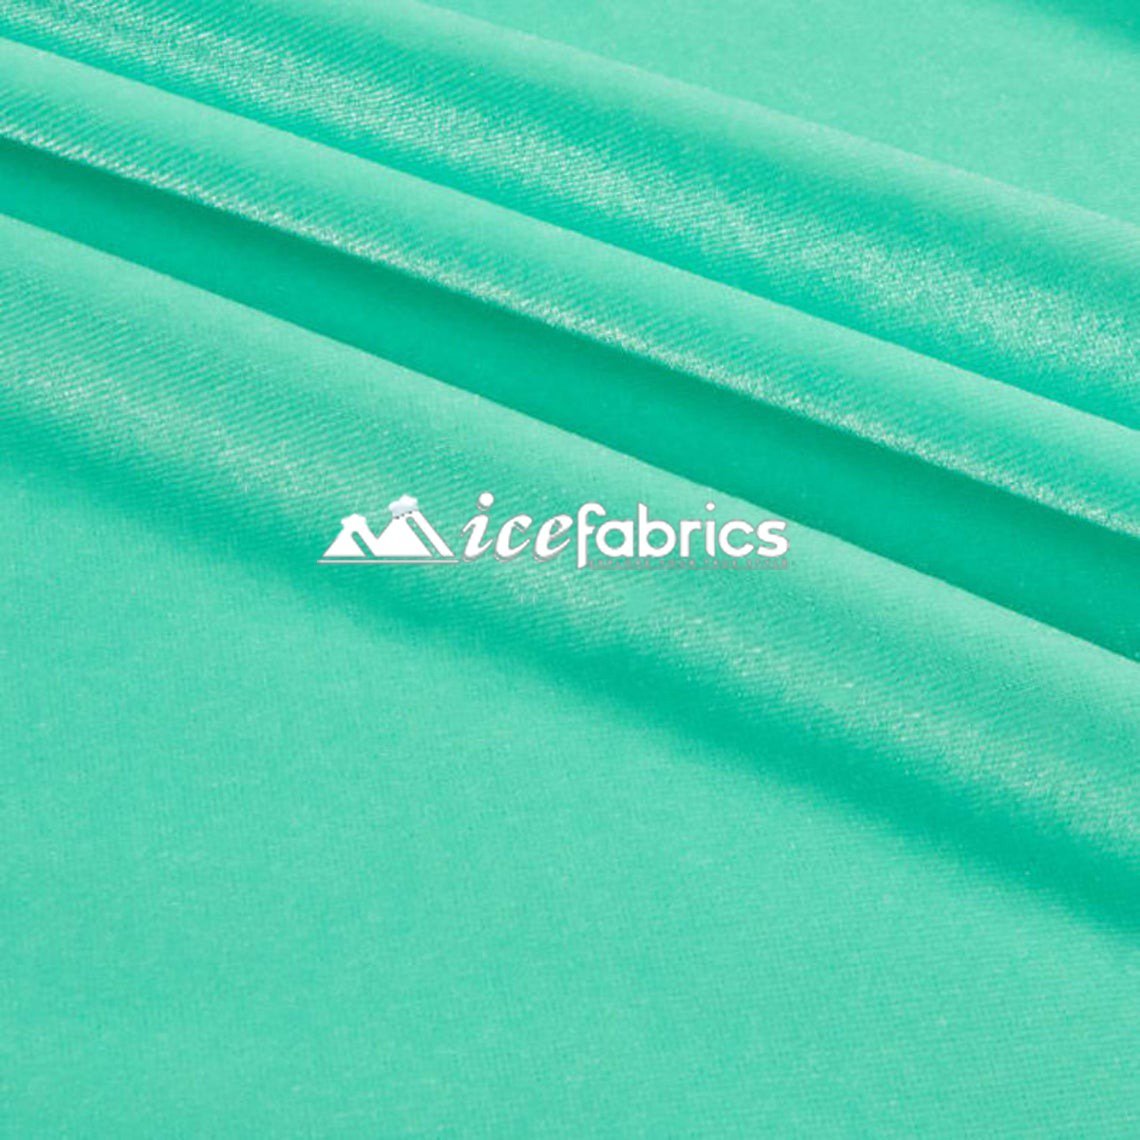 Hight Quality Stretch Velvet Fabric By The Roll (20 yards) Wholesale FabricVelvet FabricICE FABRICSICE FABRICSMintBy The Roll (60" Wide)Hight Quality Stretch Velvet Fabric By The Roll (20 yards) Wholesale Fabric ICE FABRICS Mint